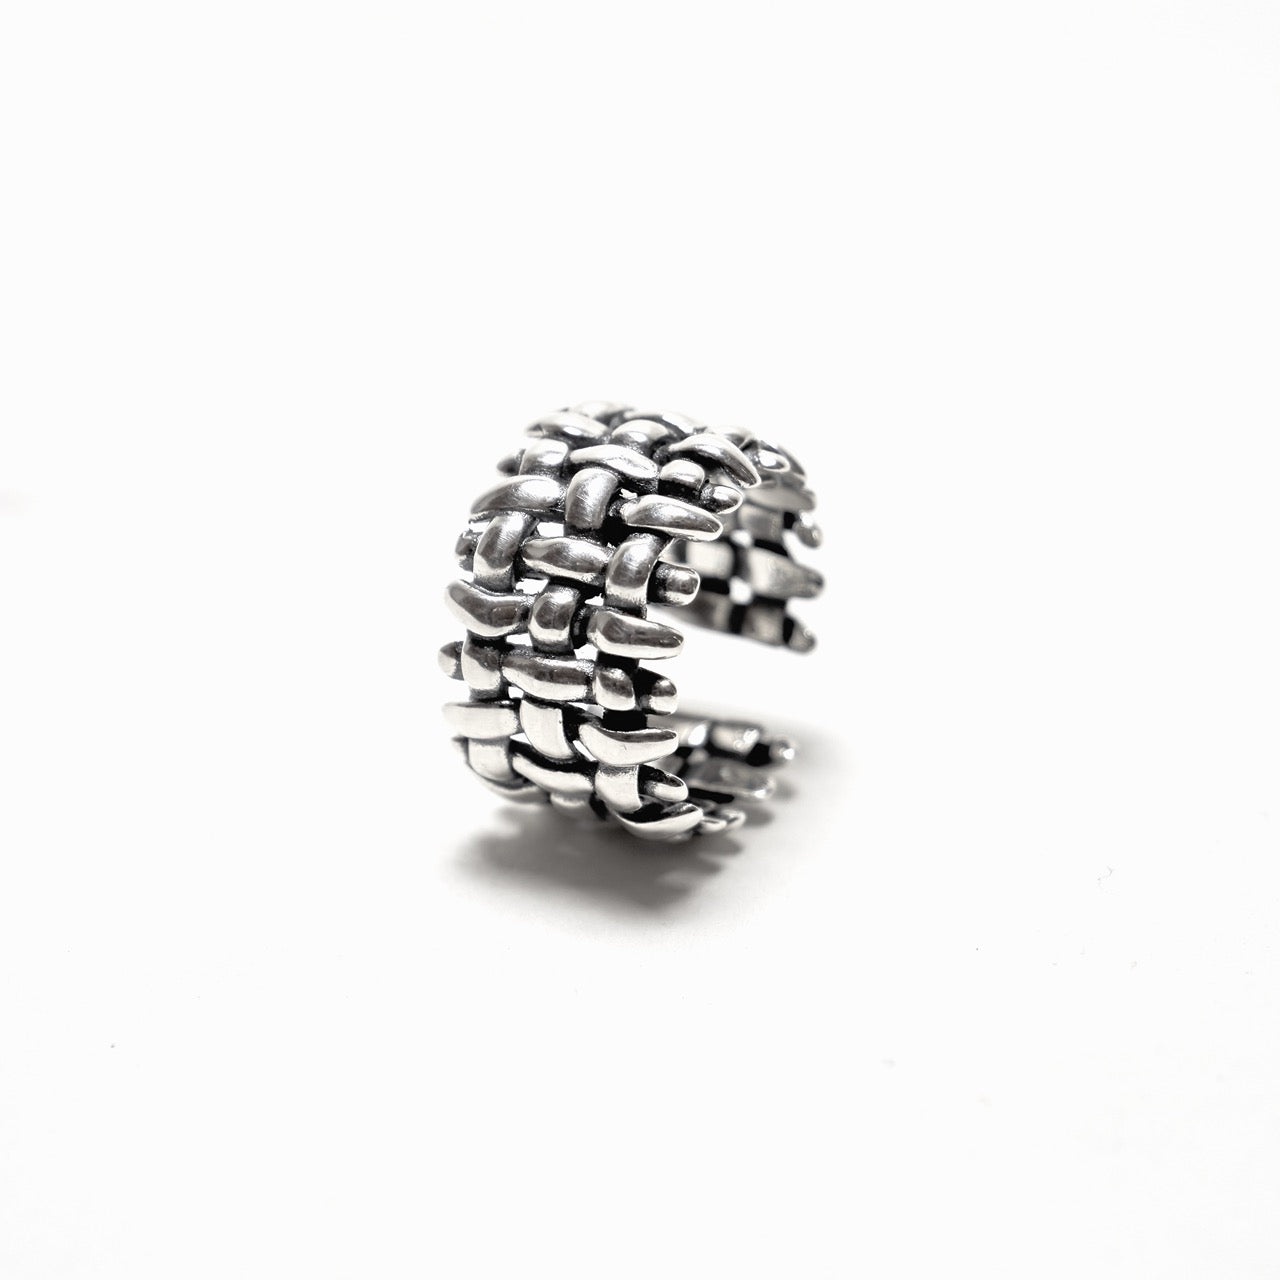 Woven Fabric Ring in Sterling Silver